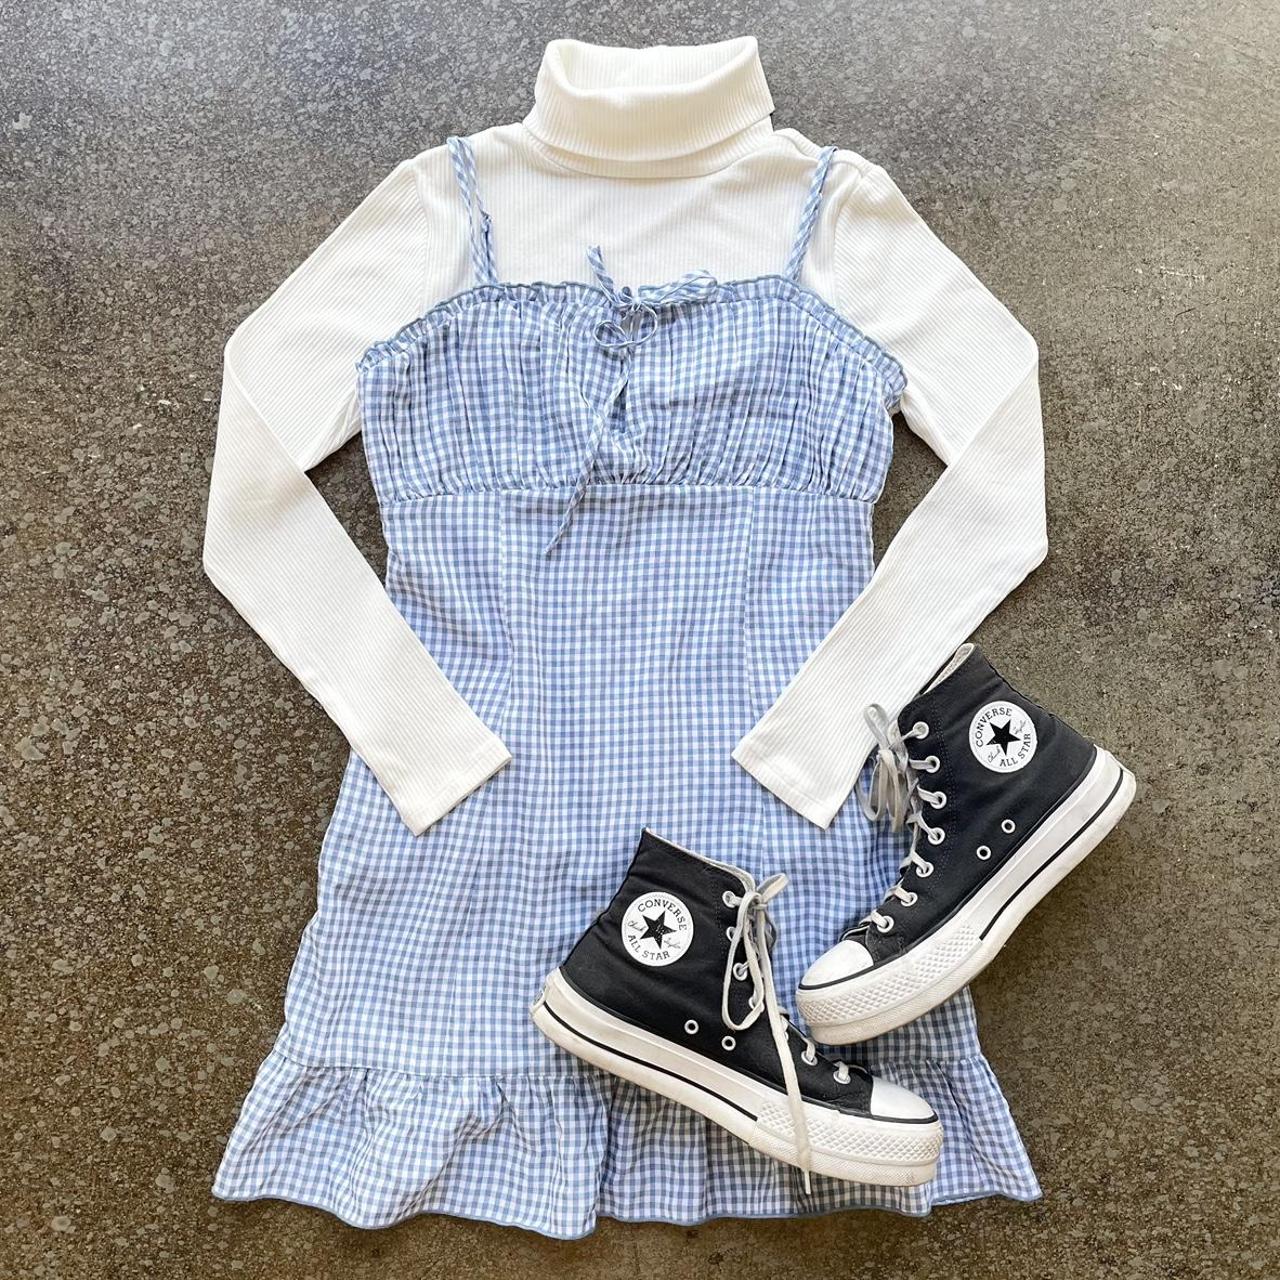 aesthetic pastel blue with star gingham, checkers, plaid